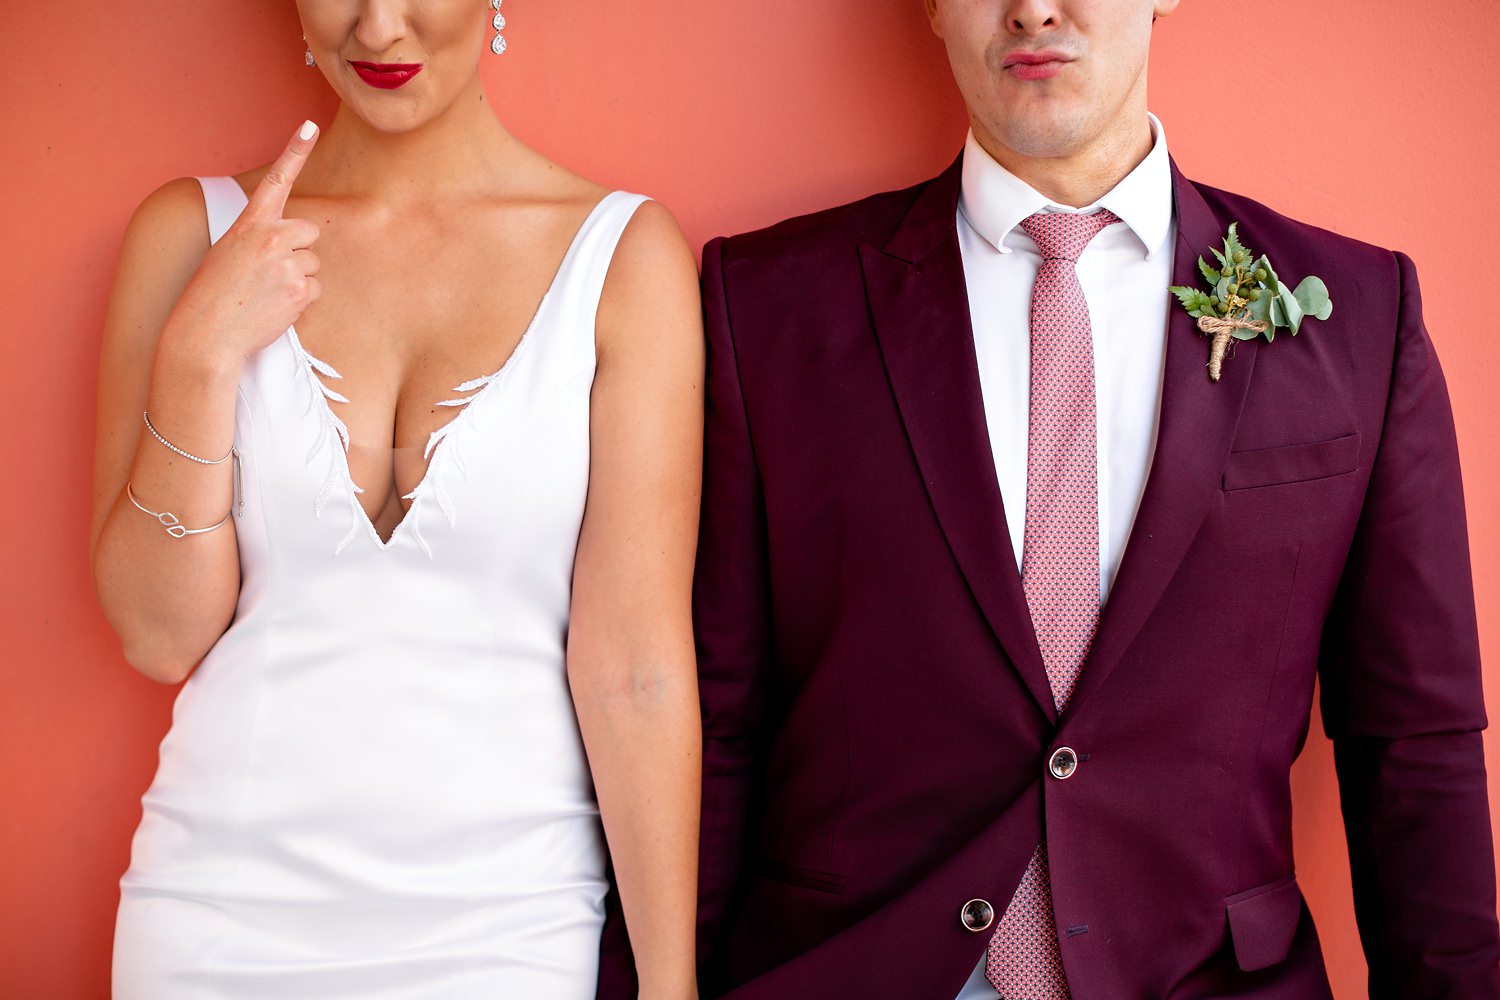 Cute photo of a bride's red lipstick rubbing off on the groom's lips after their kiss